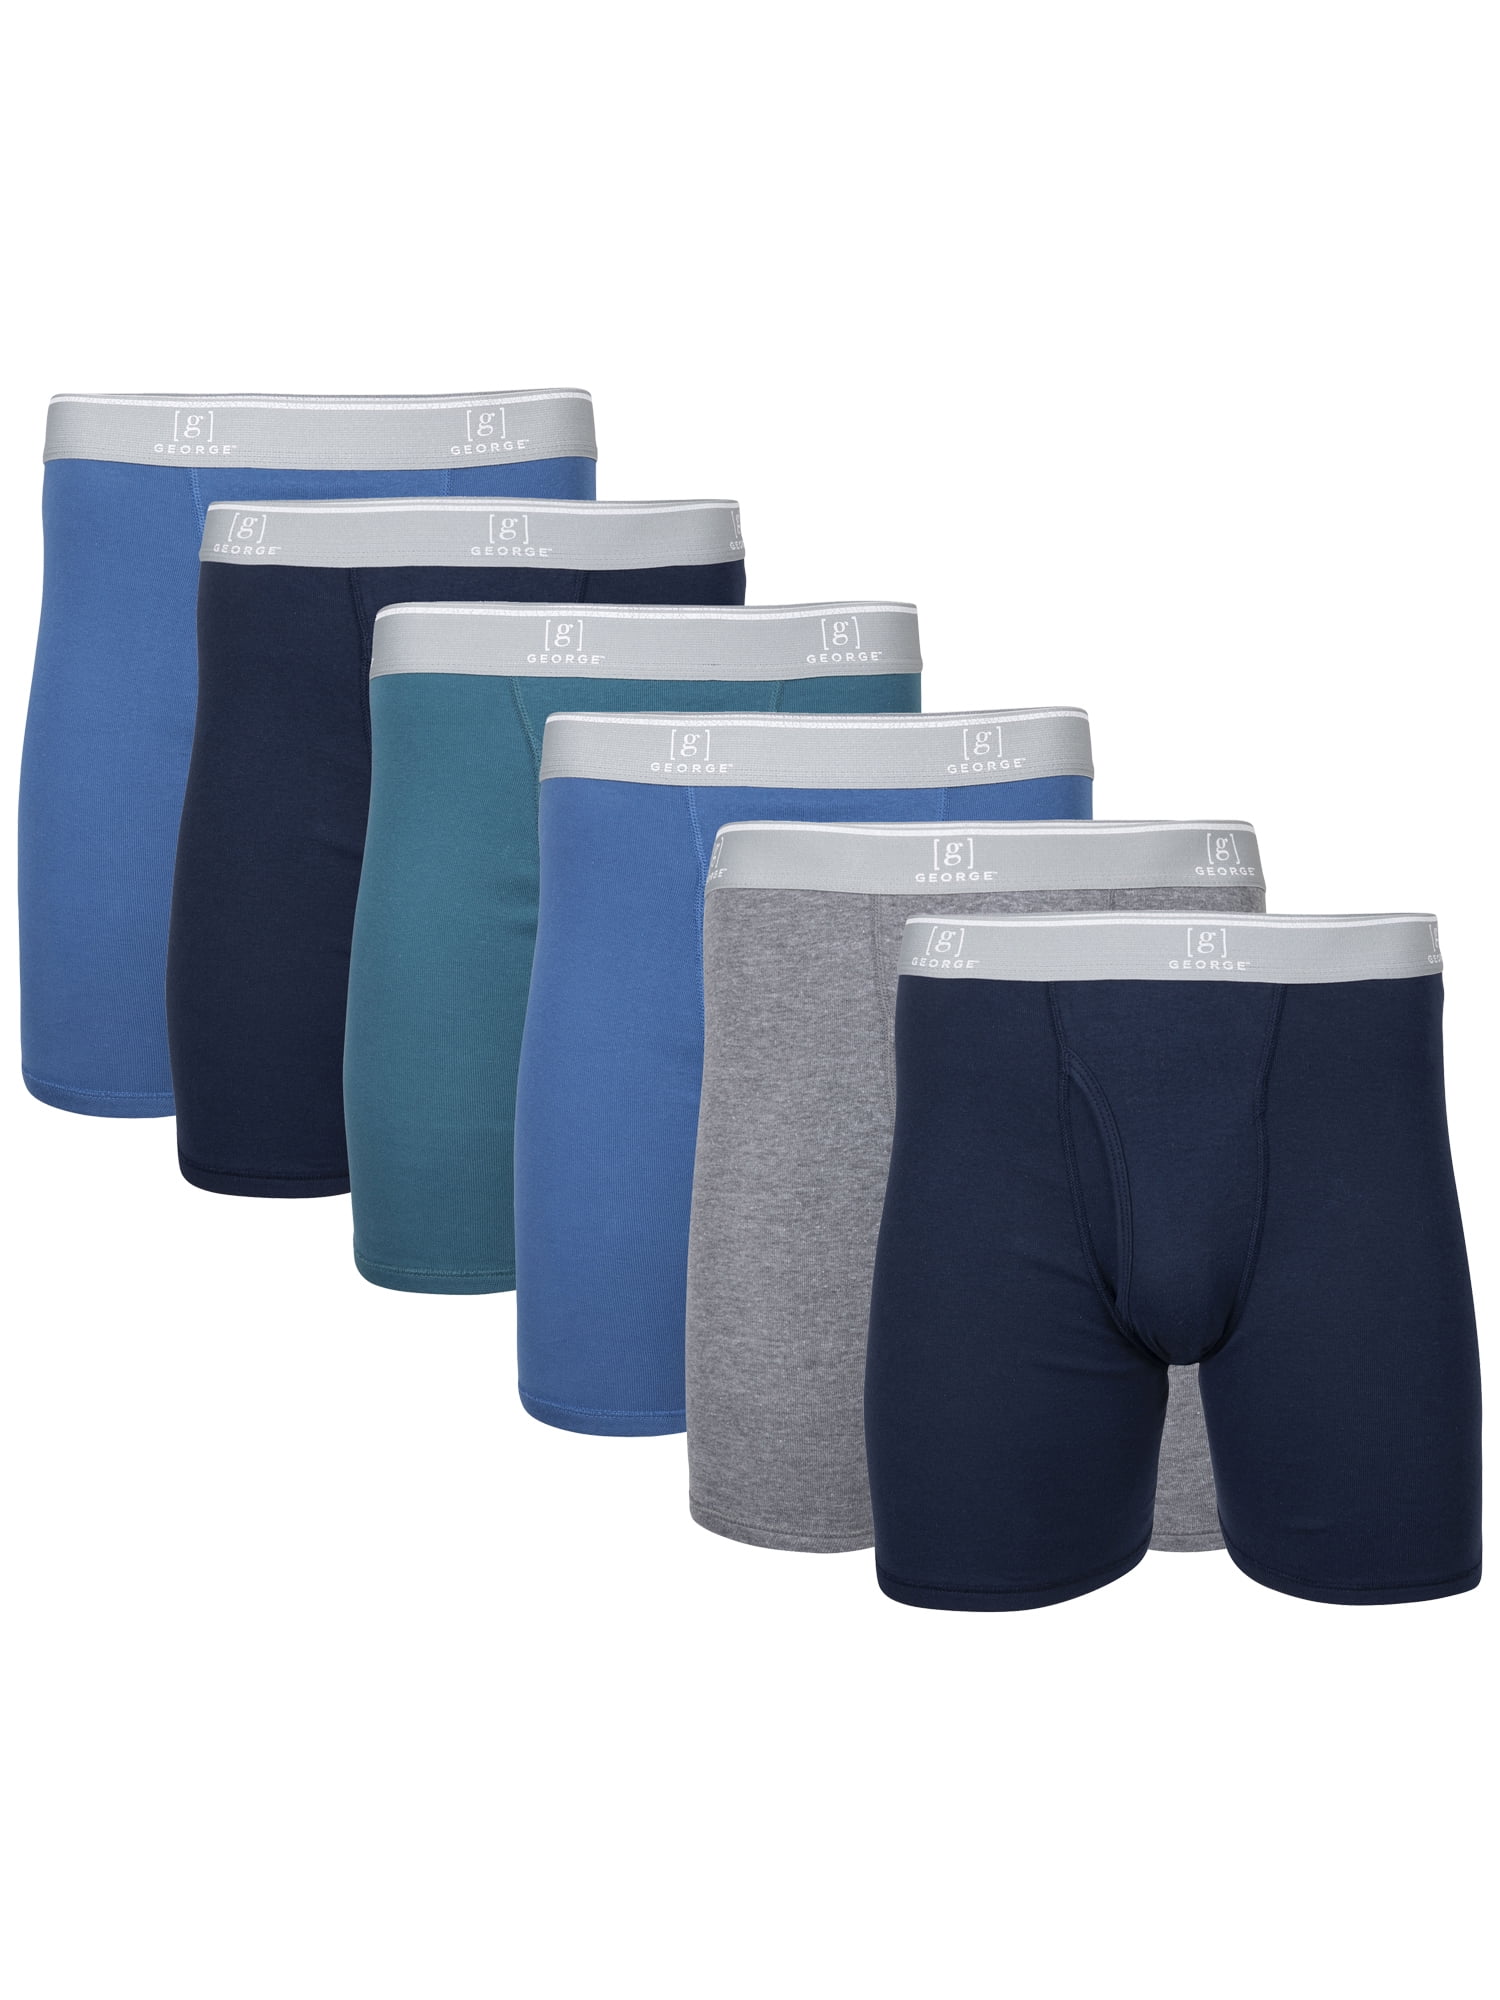 NEW MENS TEENS CLASSIC 6/12 PAIR MULTIPACK MIXED EVERYDAY 100% COTTON BRIEFS 